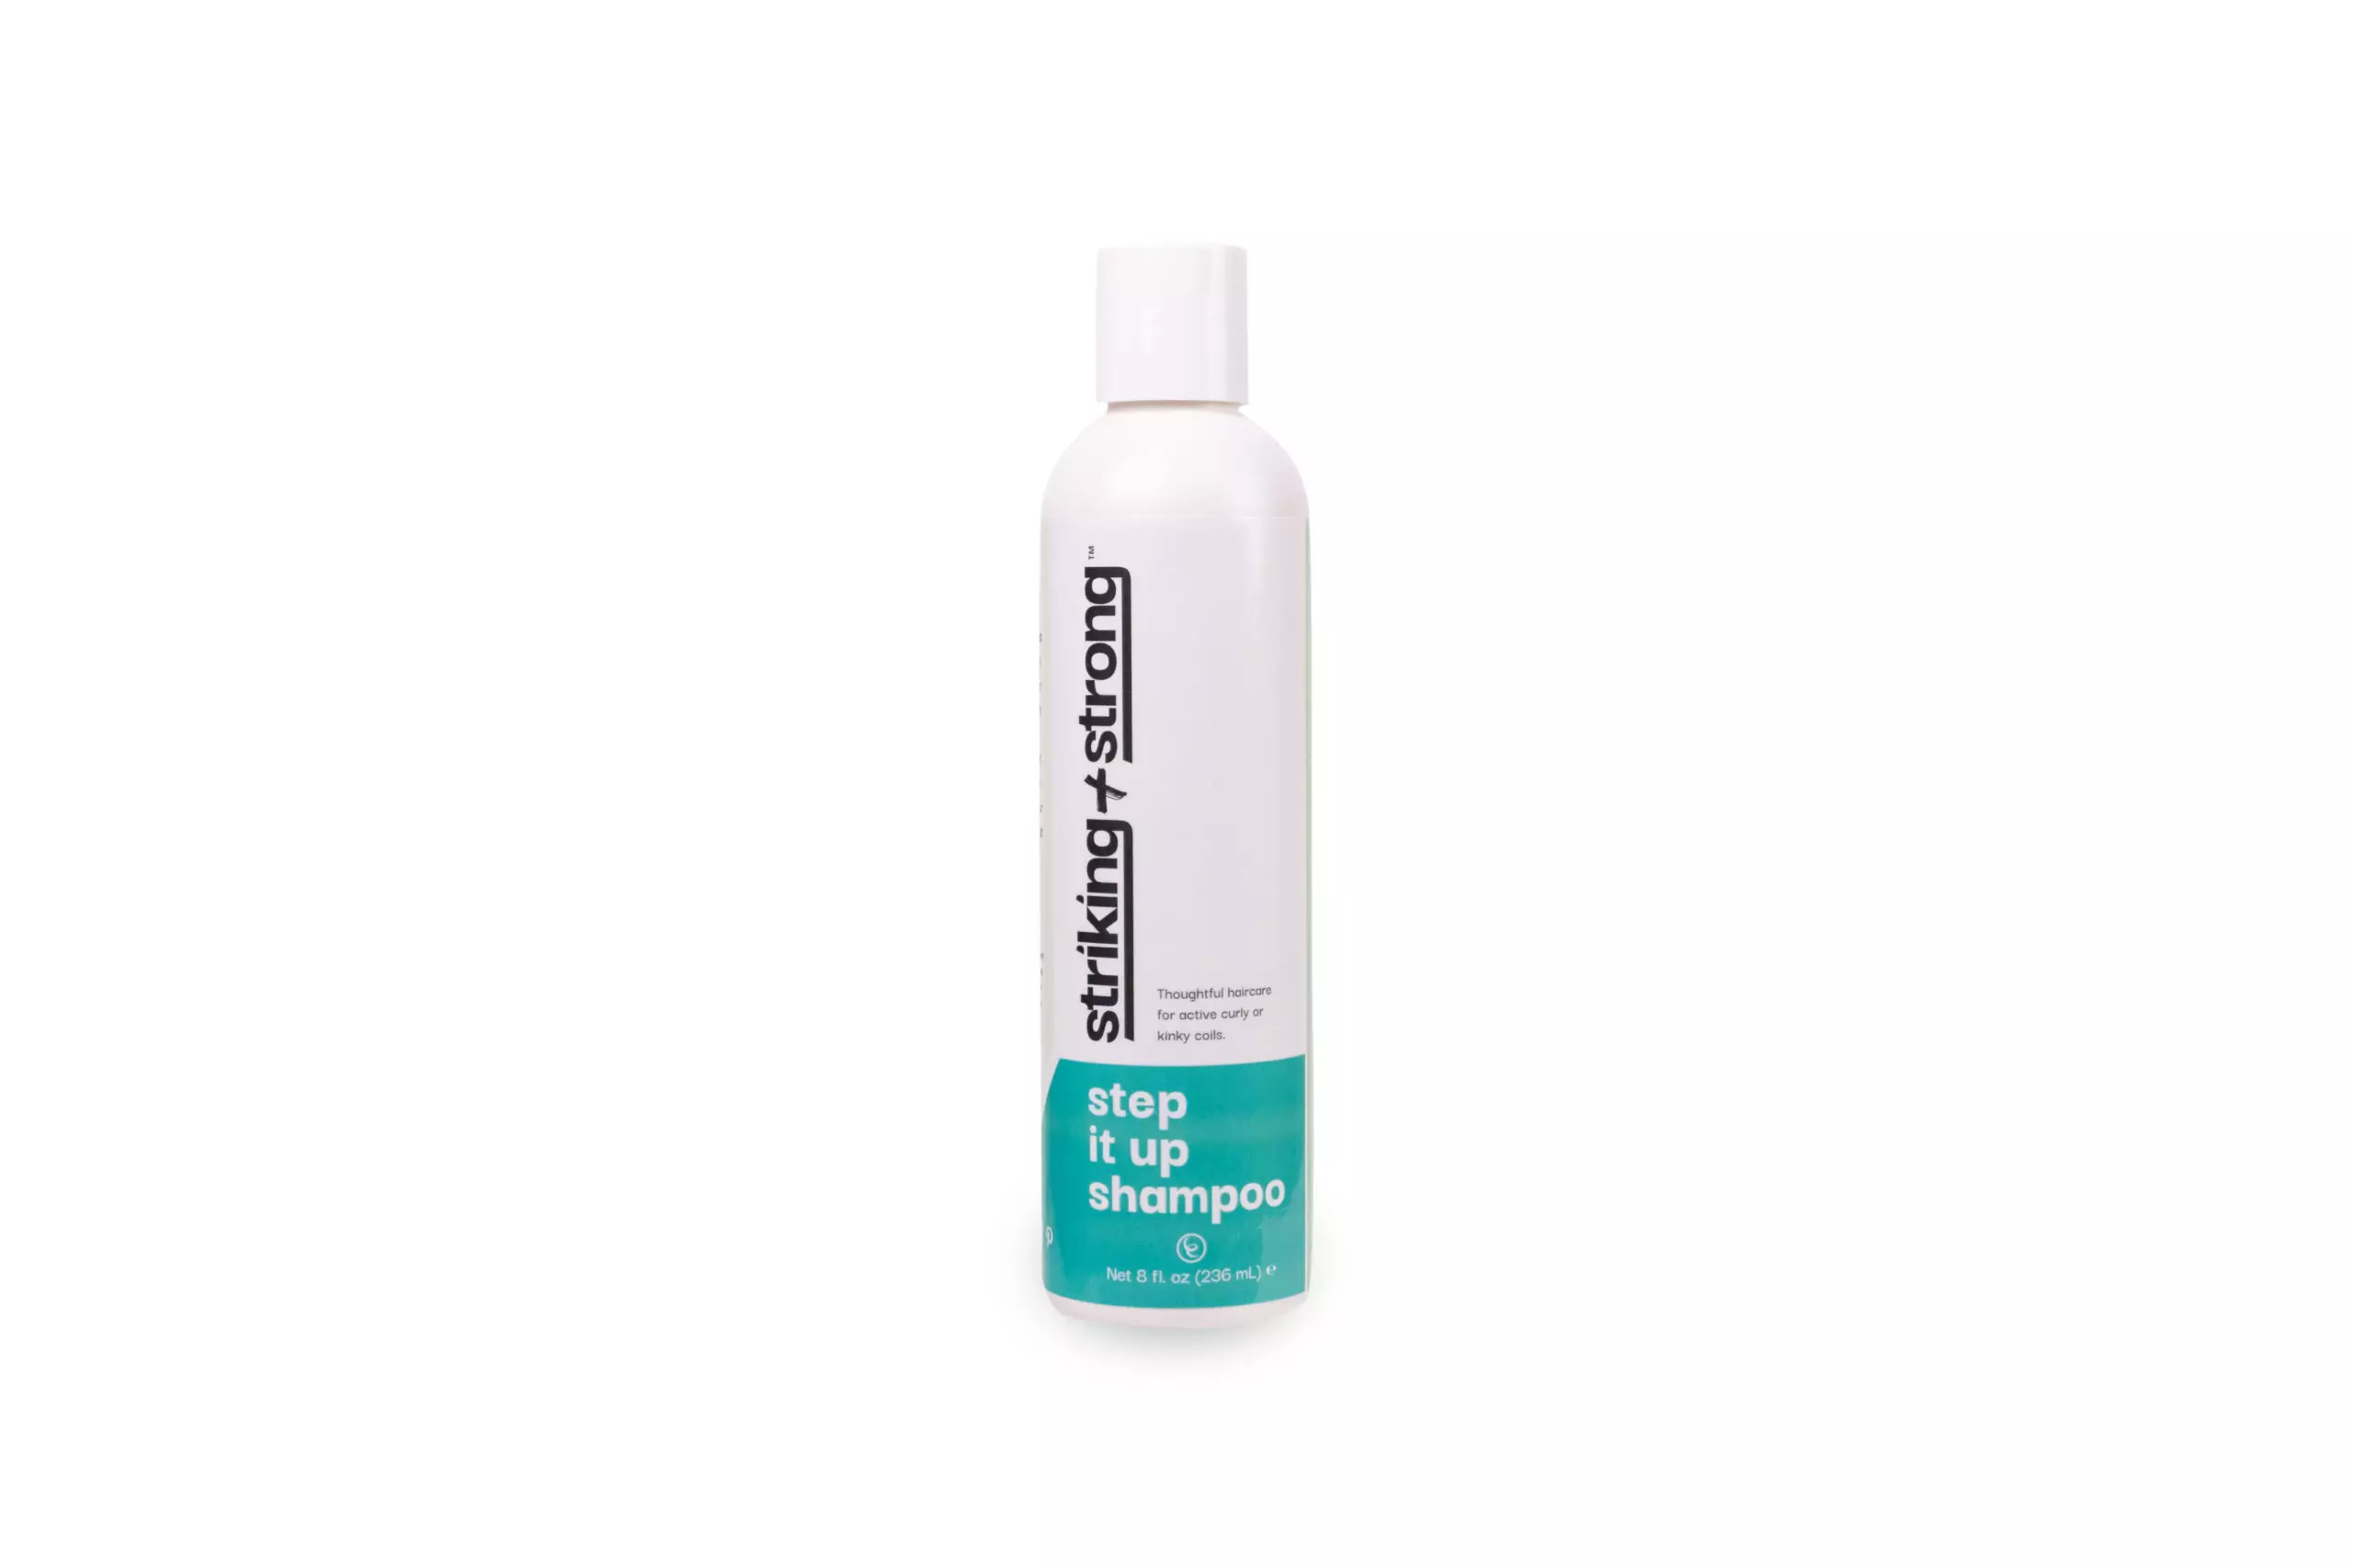 Step It Up Shampoo by Striking + Strong